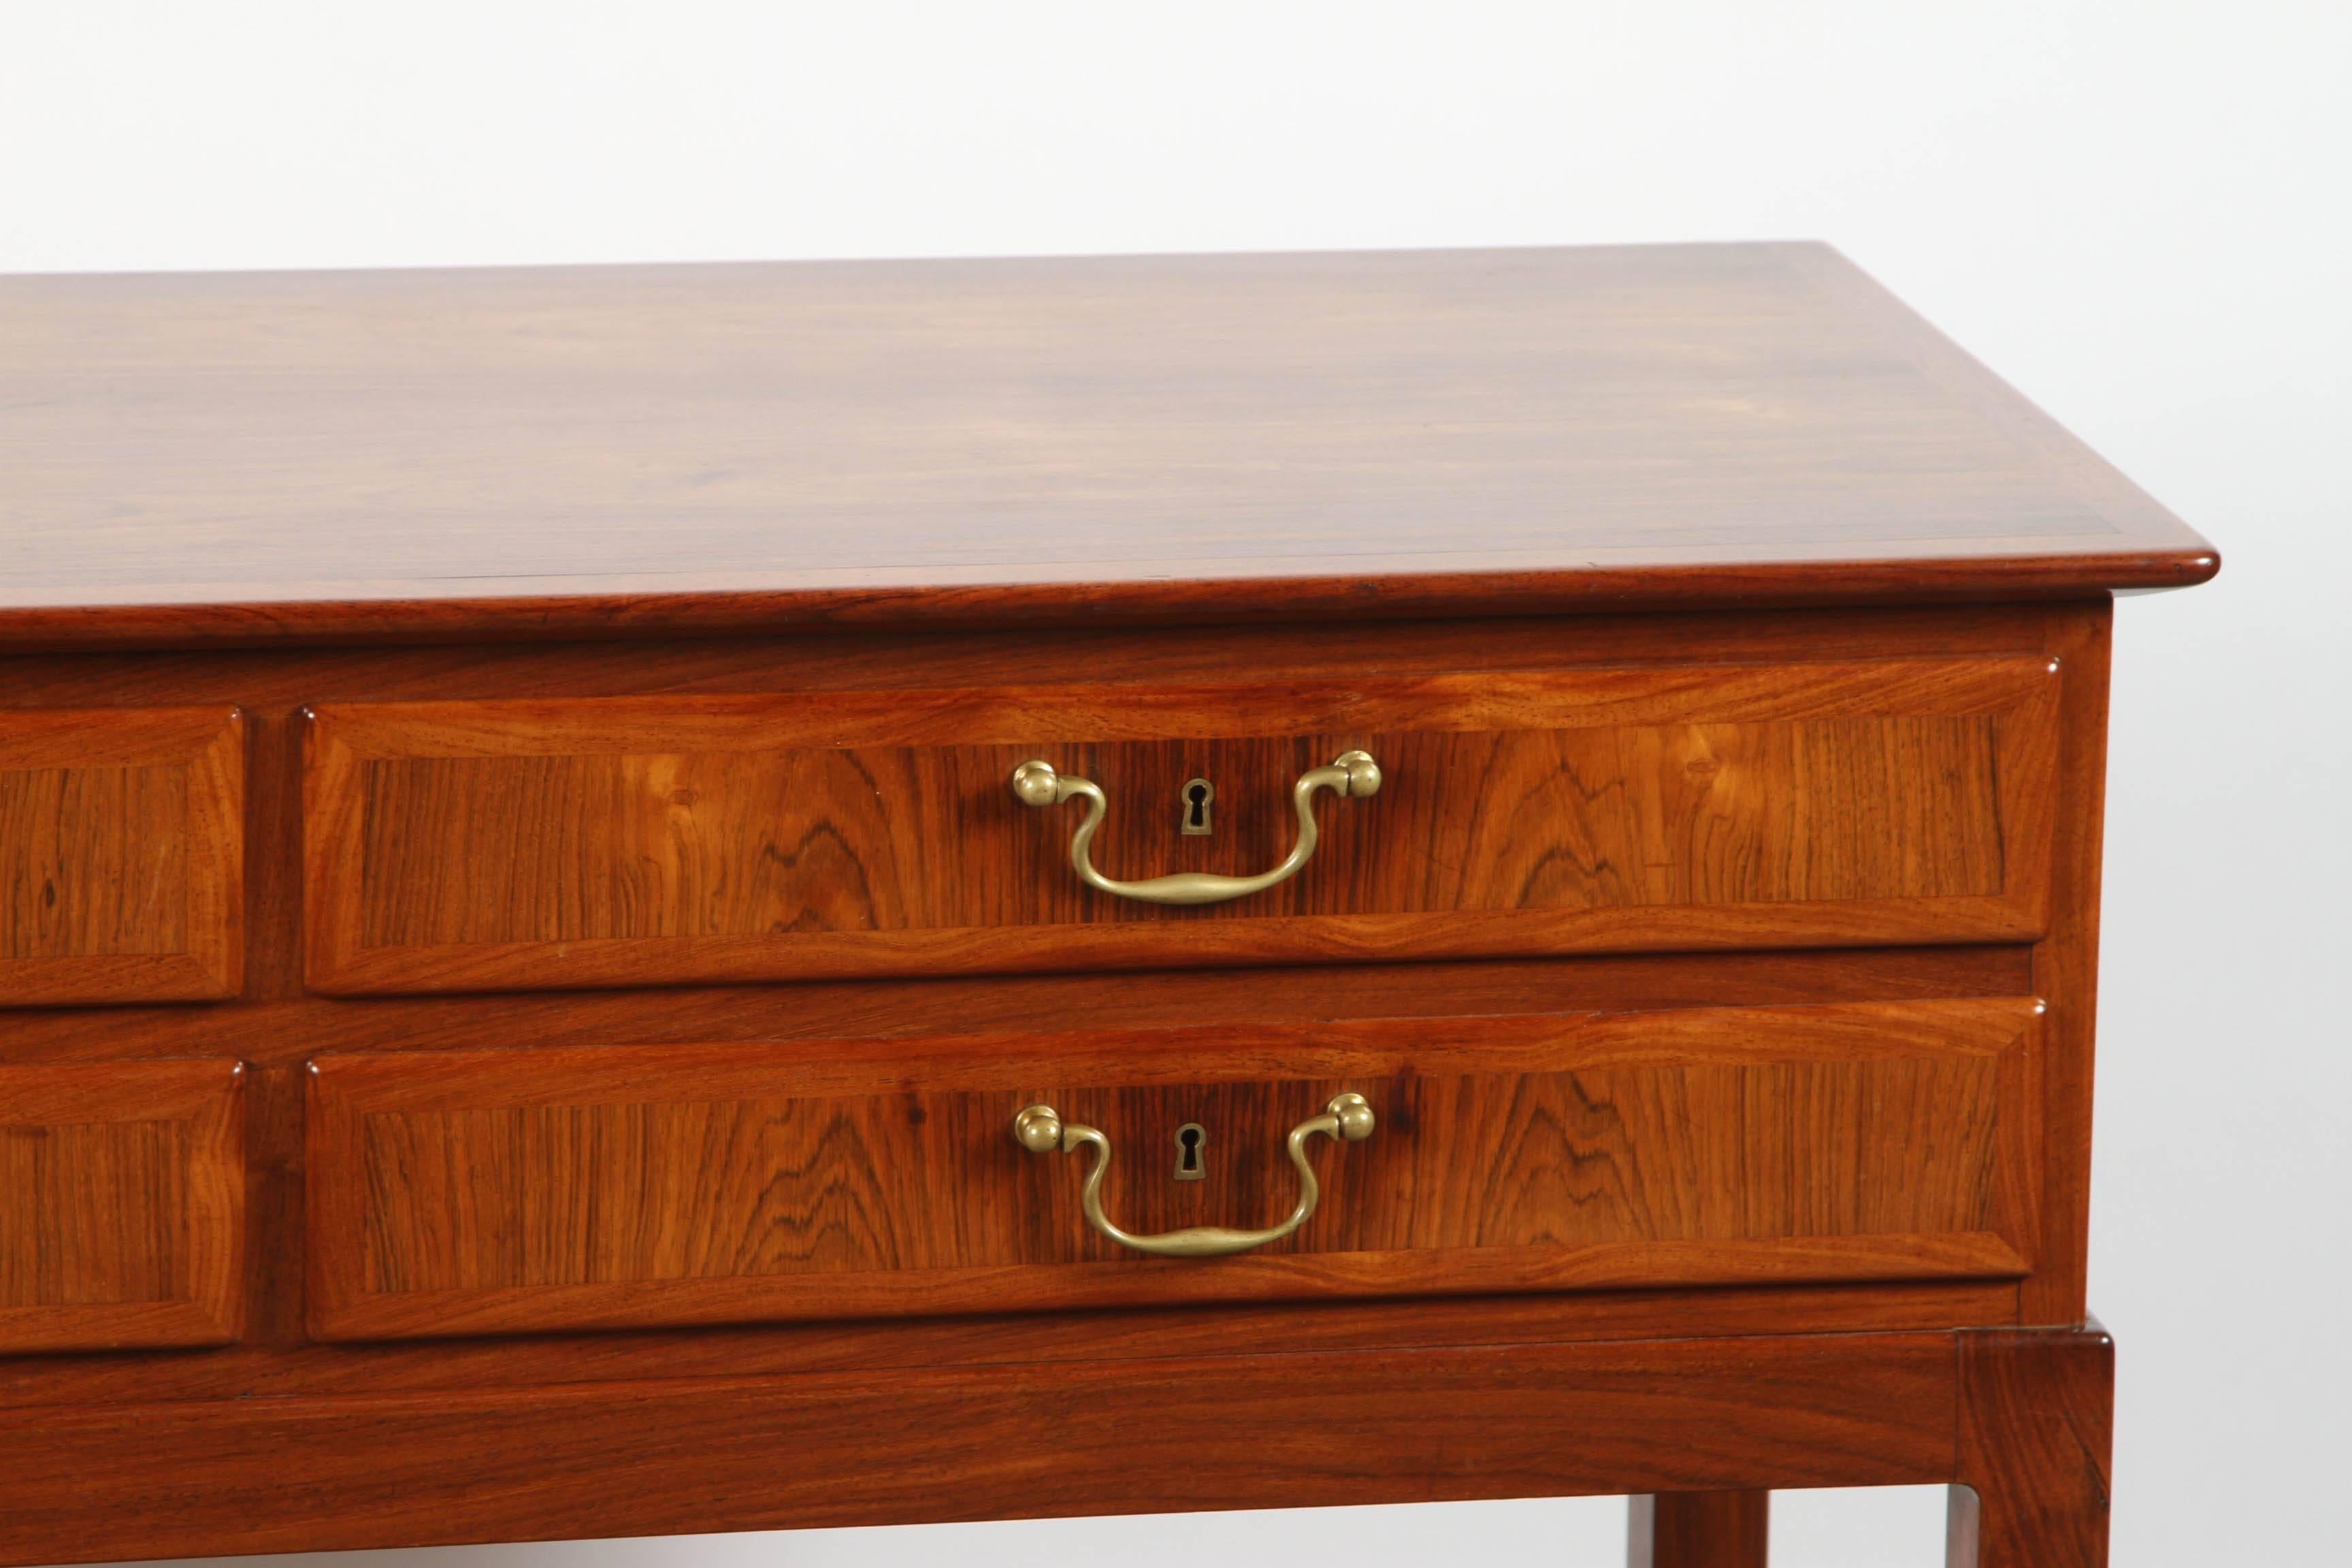 Four drawers with English inspired handles, resting on an Asian inspired support.